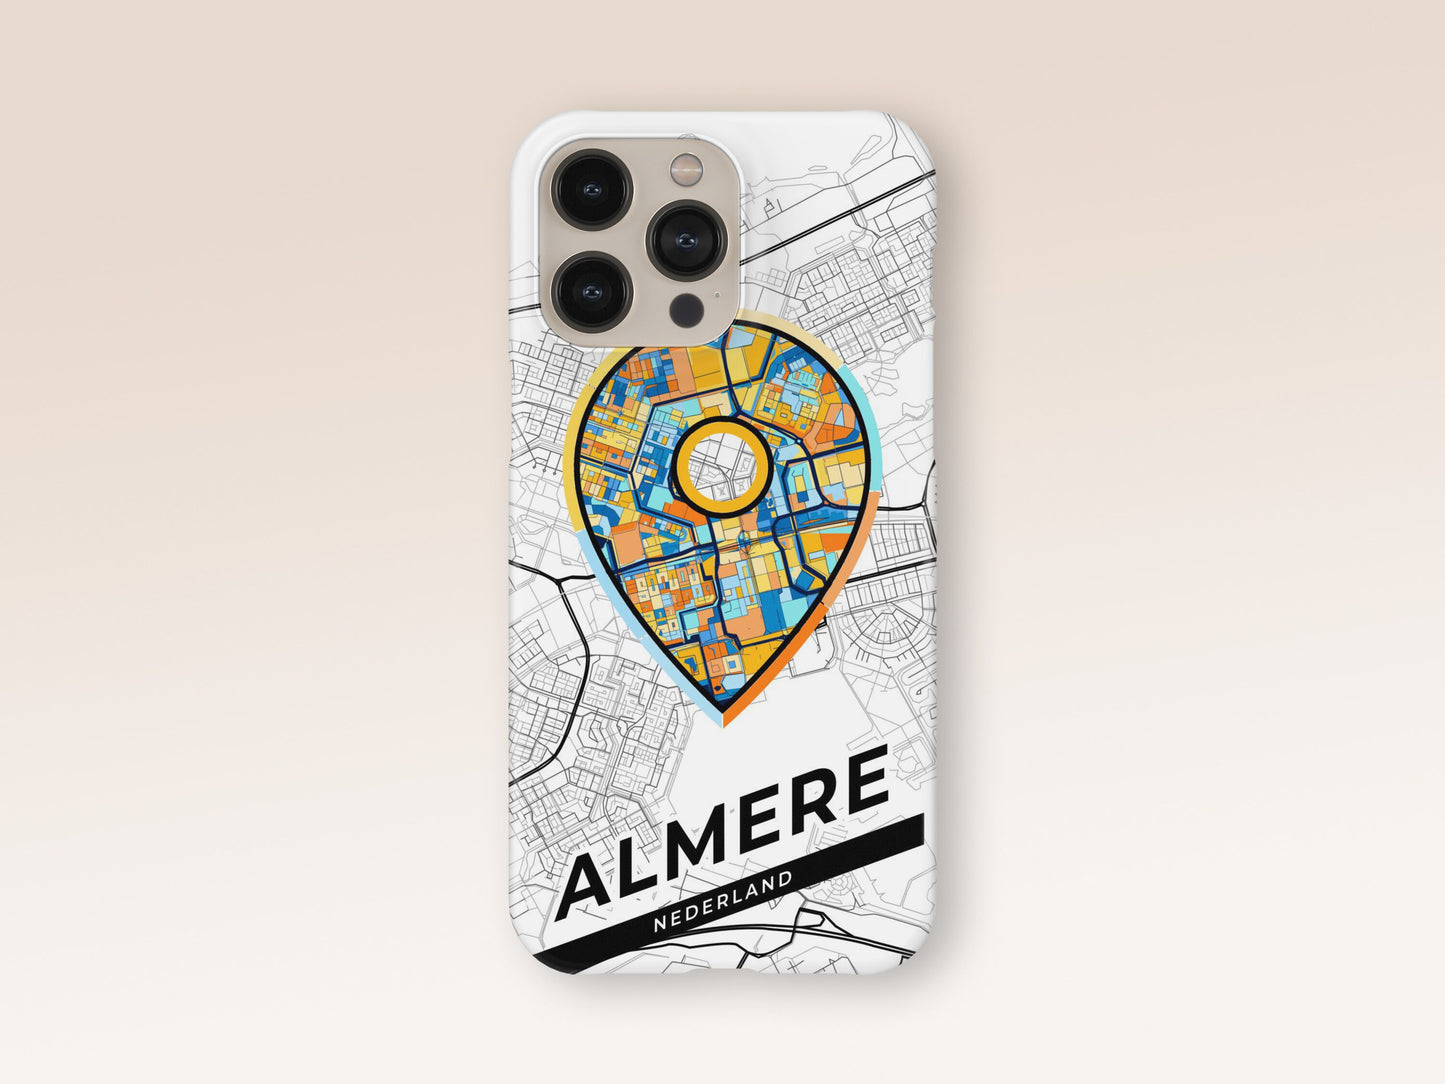 Almere Netherlands slim phone case with colorful icon. Birthday, wedding or housewarming gift. Couple match cases. 1